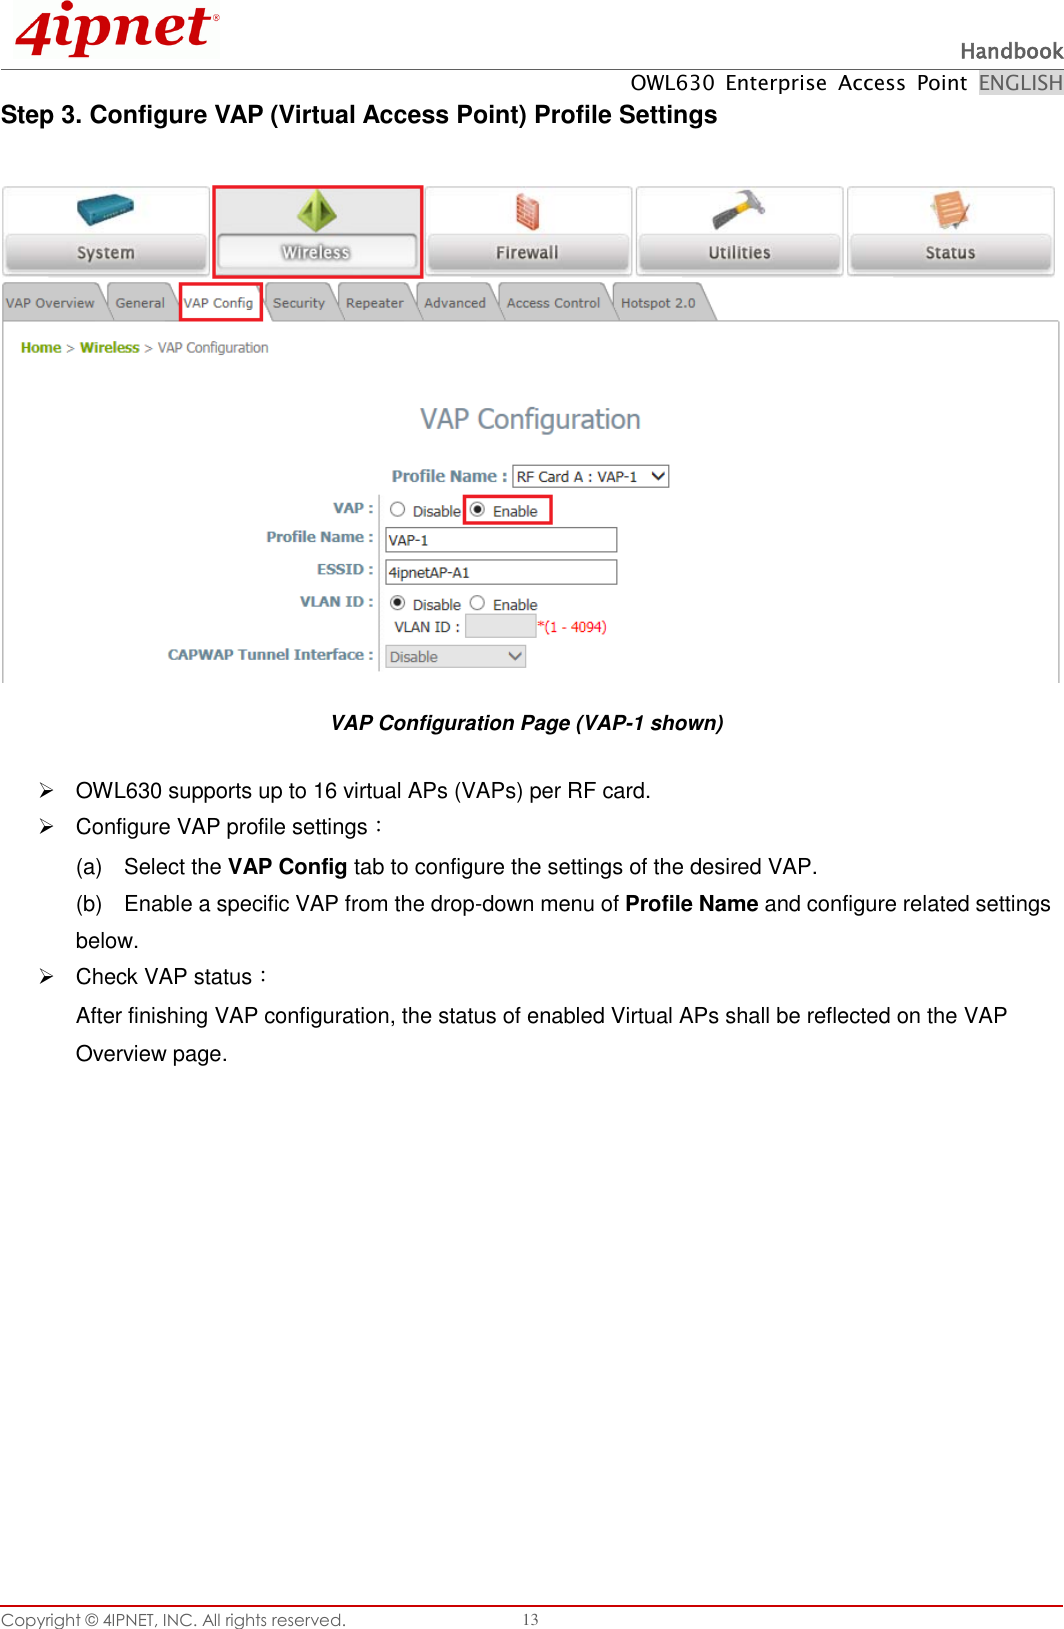  Handbook OWL630  Enterprise  Access  Point  ENGLISH Copyright ©  4IPNET, INC. All rights reserved.   13 Step 3. Configure VAP (Virtual Access Point) Profile Settings  VAP Configuration Page (VAP-1 shown)   OWL630 supports up to 16 virtual APs (VAPs) per RF card.  Configure VAP profile settings： (a)    Select the VAP Config tab to configure the settings of the desired VAP.   (b)    Enable a specific VAP from the drop-down menu of Profile Name and configure related settings below.   Check VAP status： After finishing VAP configuration, the status of enabled Virtual APs shall be reflected on the VAP Overview page.   